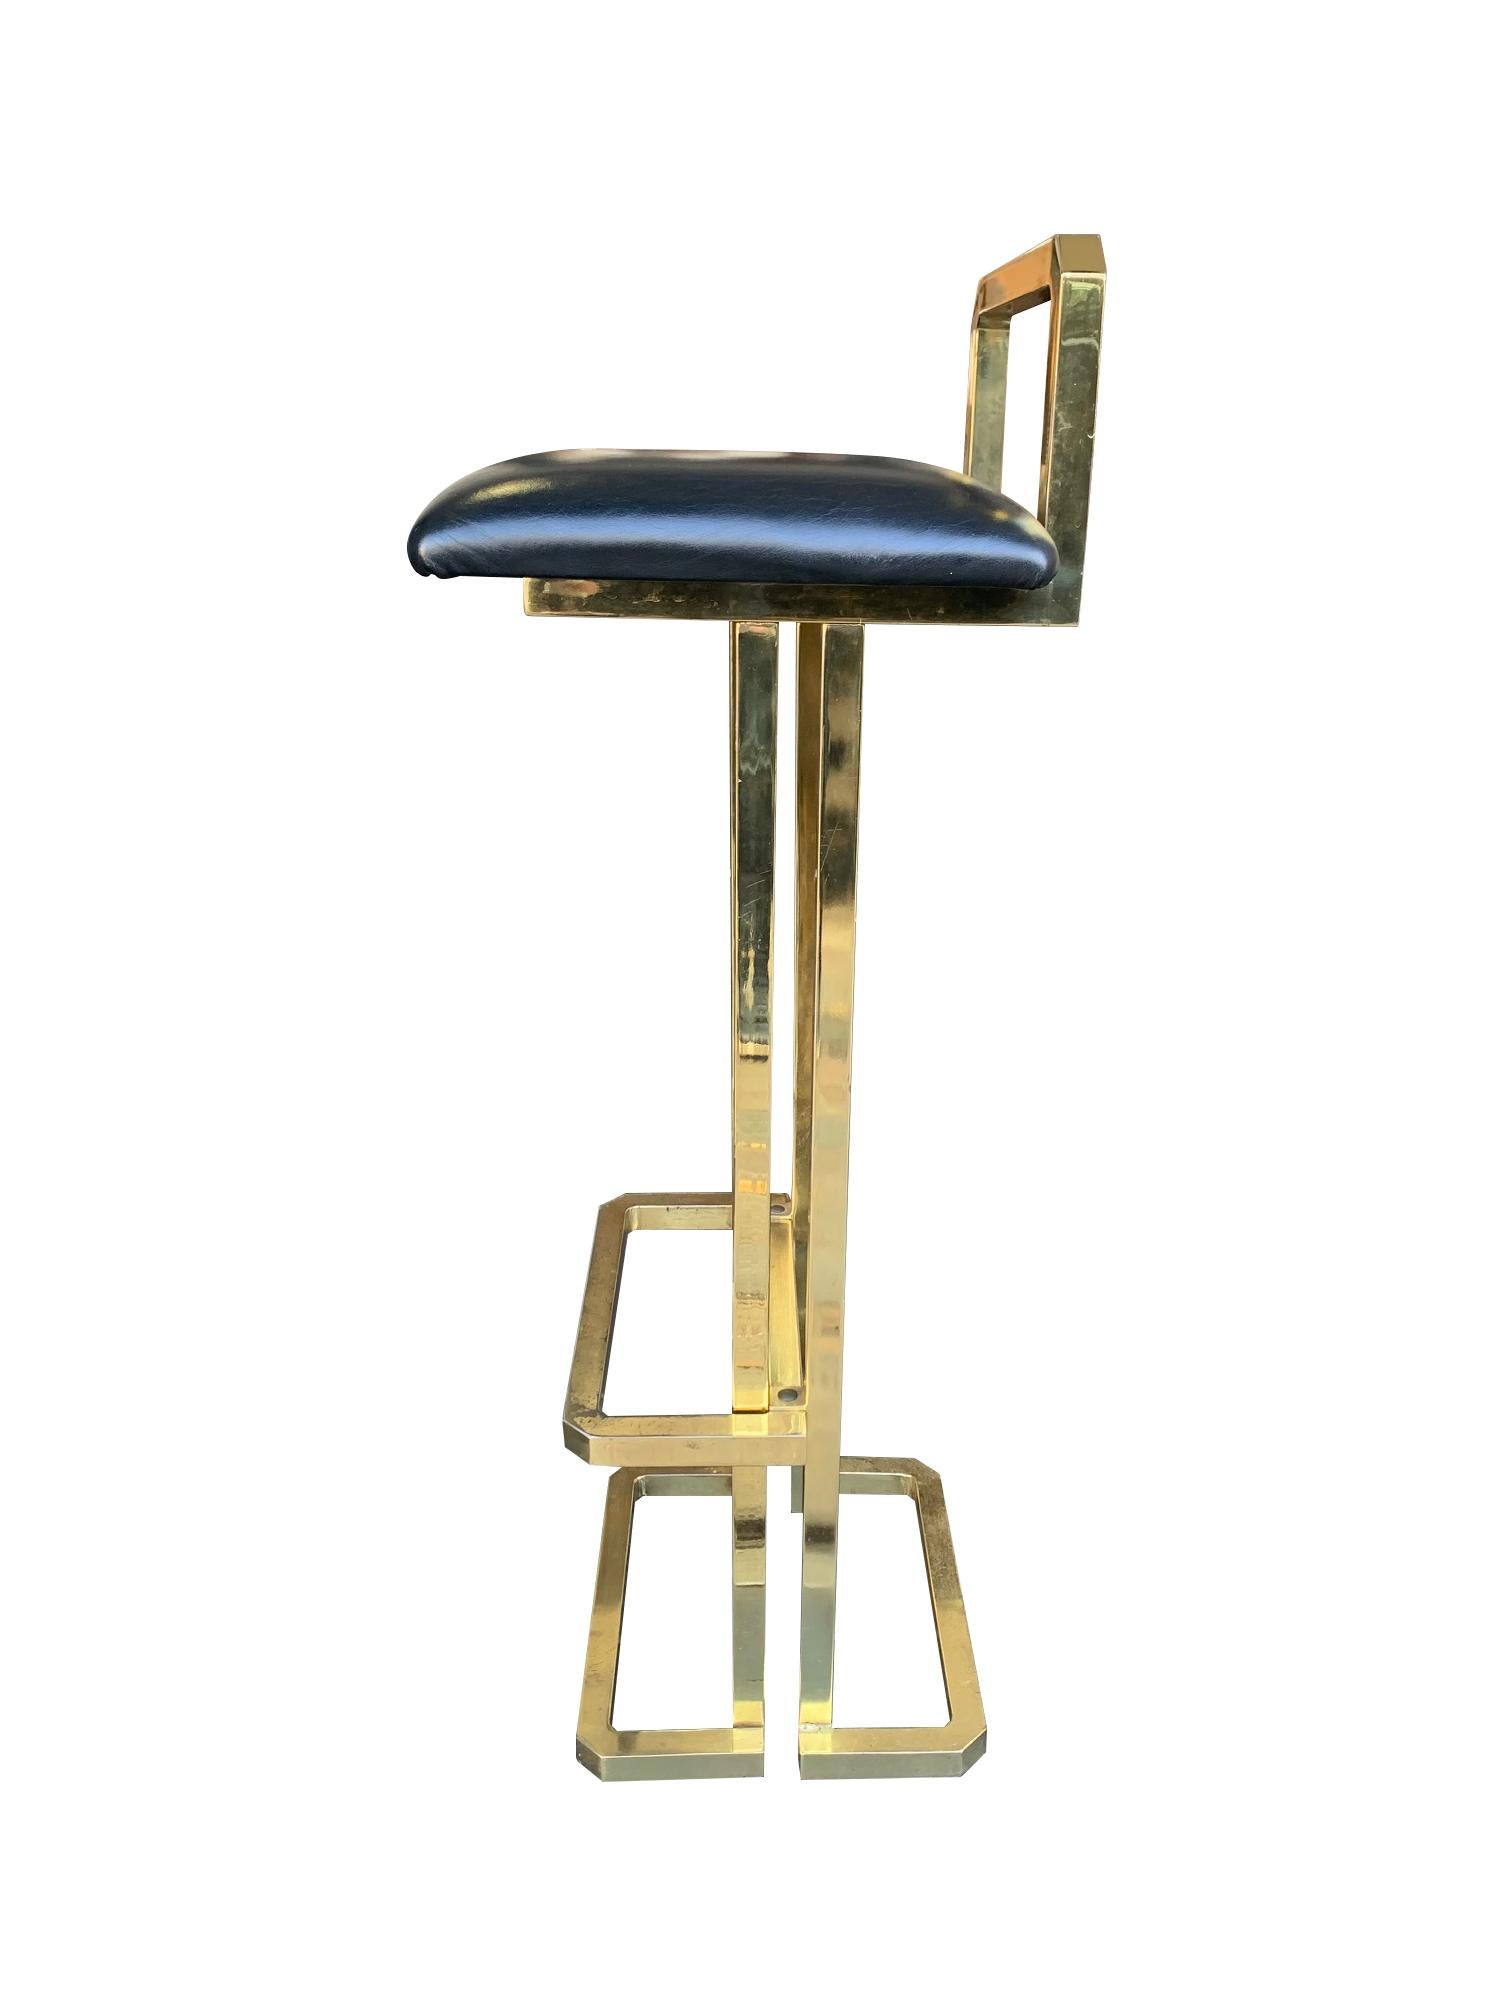 Late 20th Century Set of 3 Maison Jansen Style Gilt Metal Stools with Black Leather Seat Pads For Sale